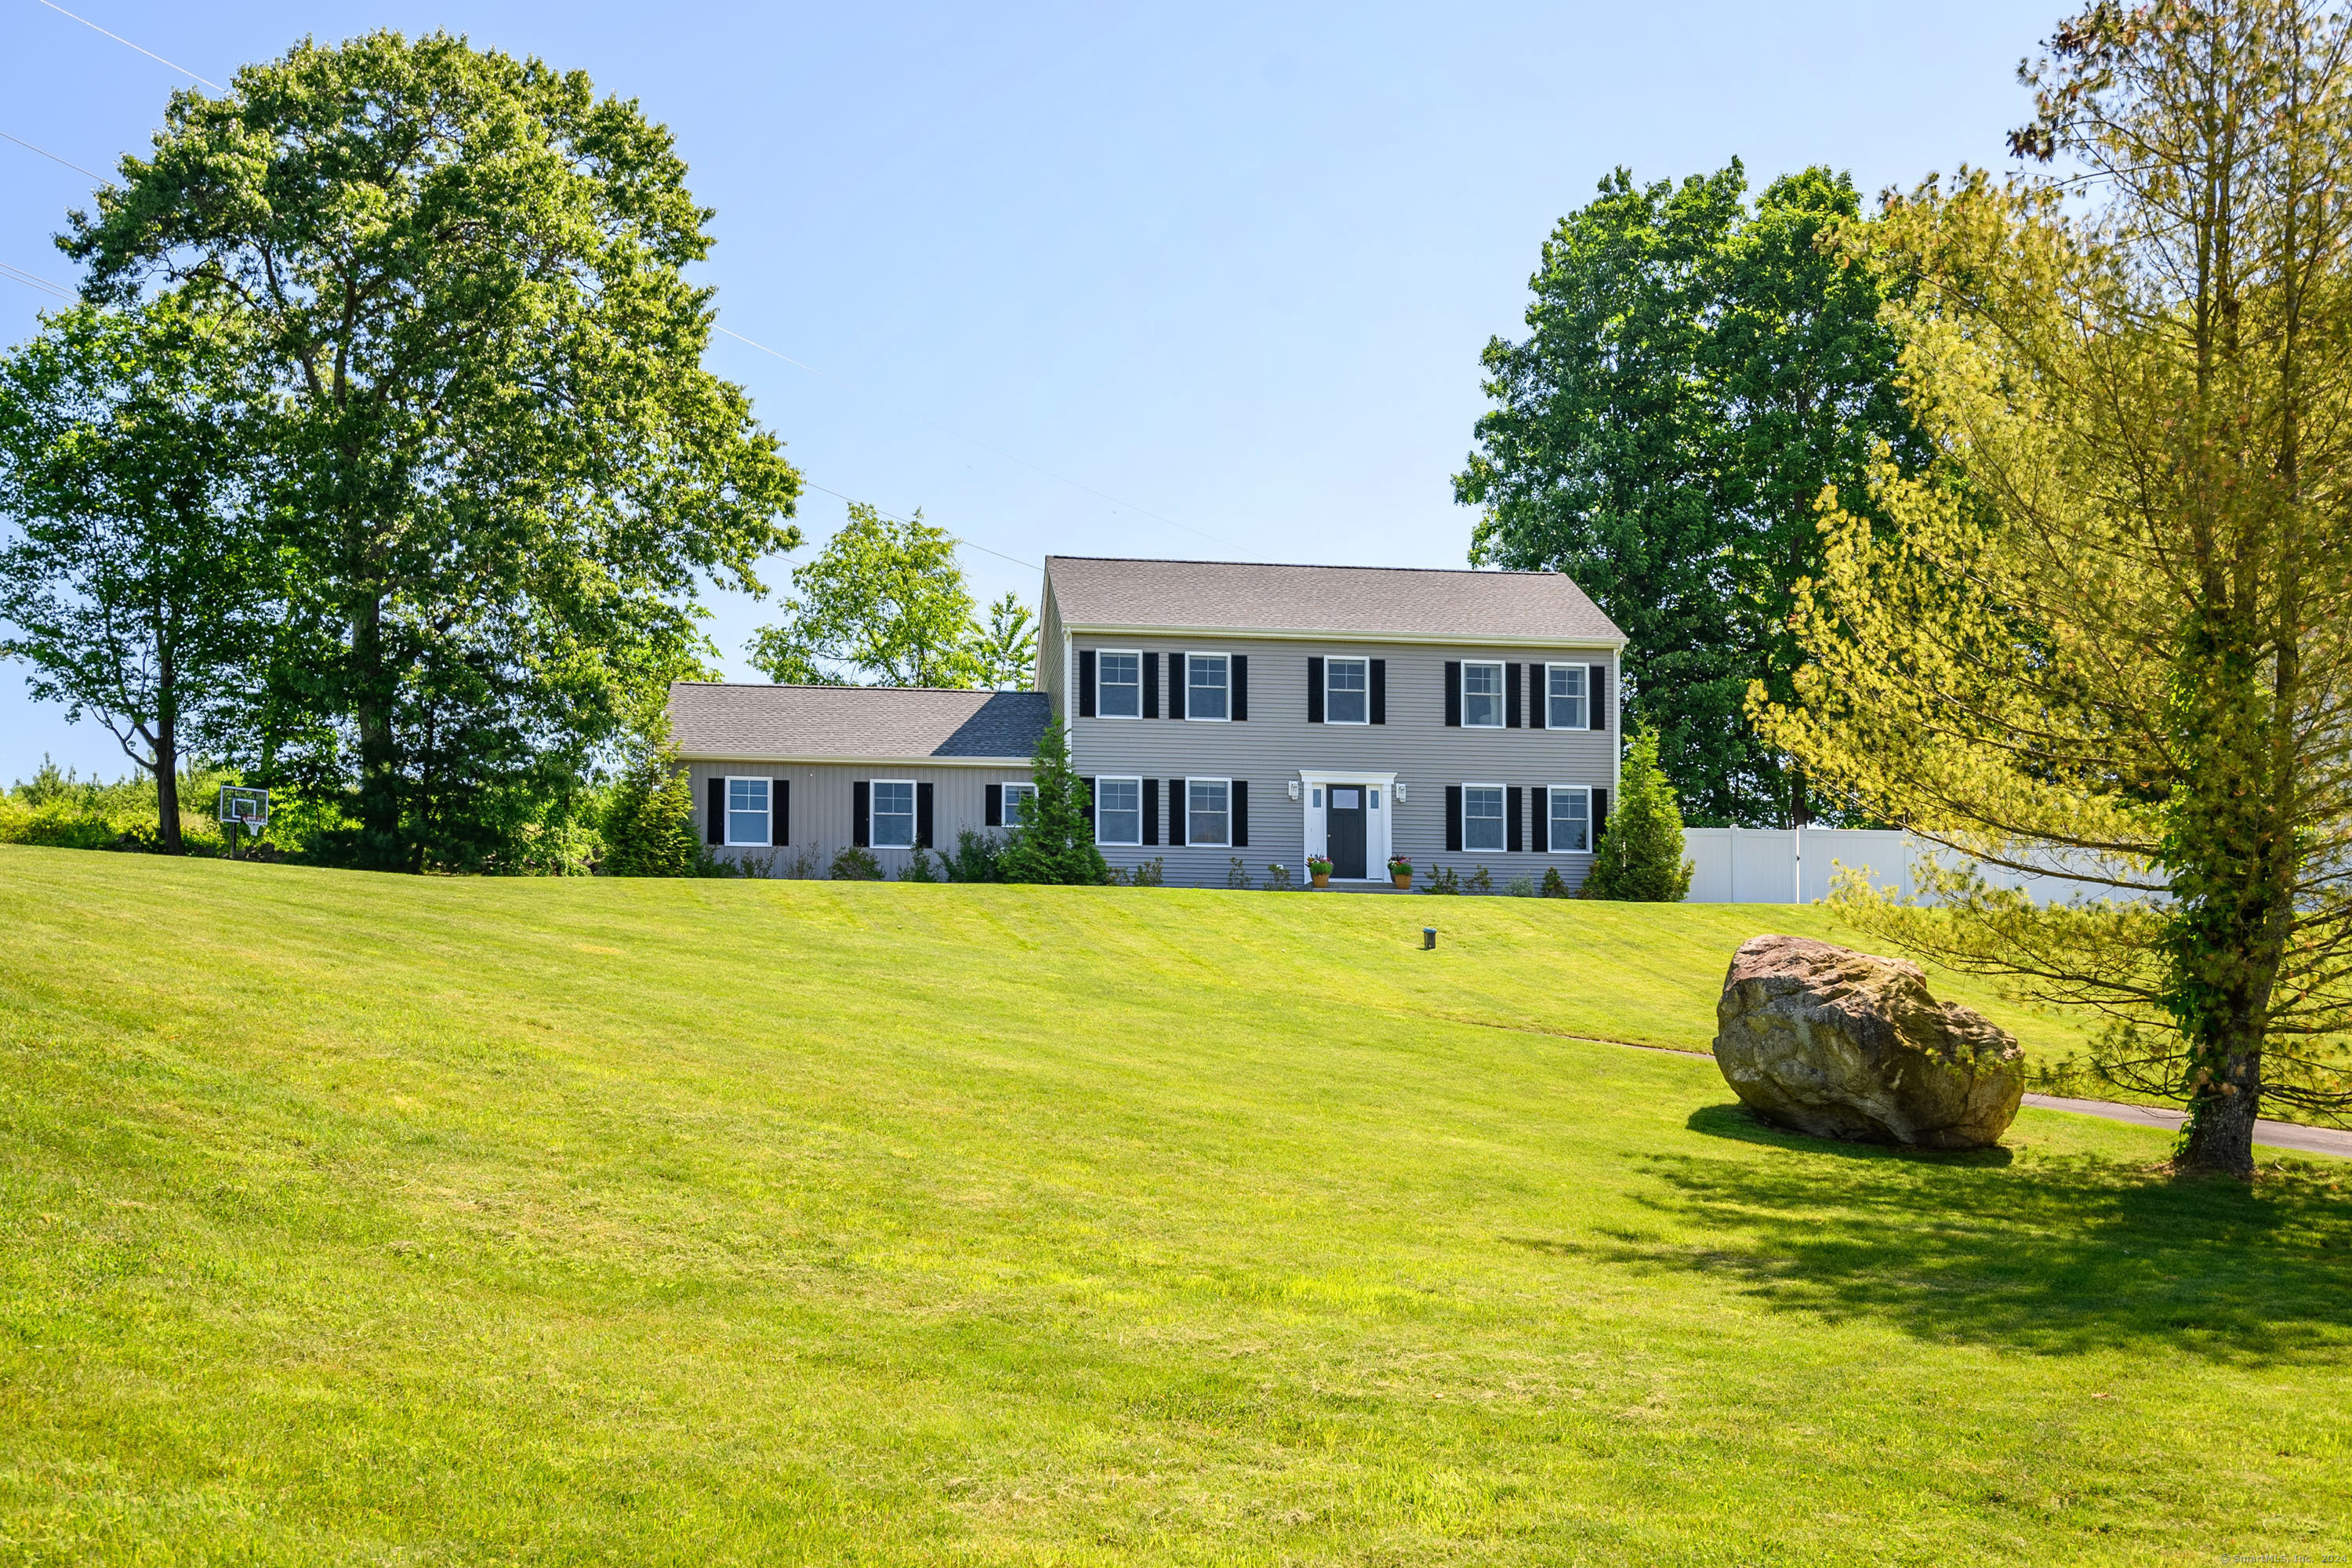 Property for Sale at 8 Galloping Hill Road, Bethel, Connecticut - Bedrooms: 4 
Bathrooms: 3 
Rooms: 14  - $715,000